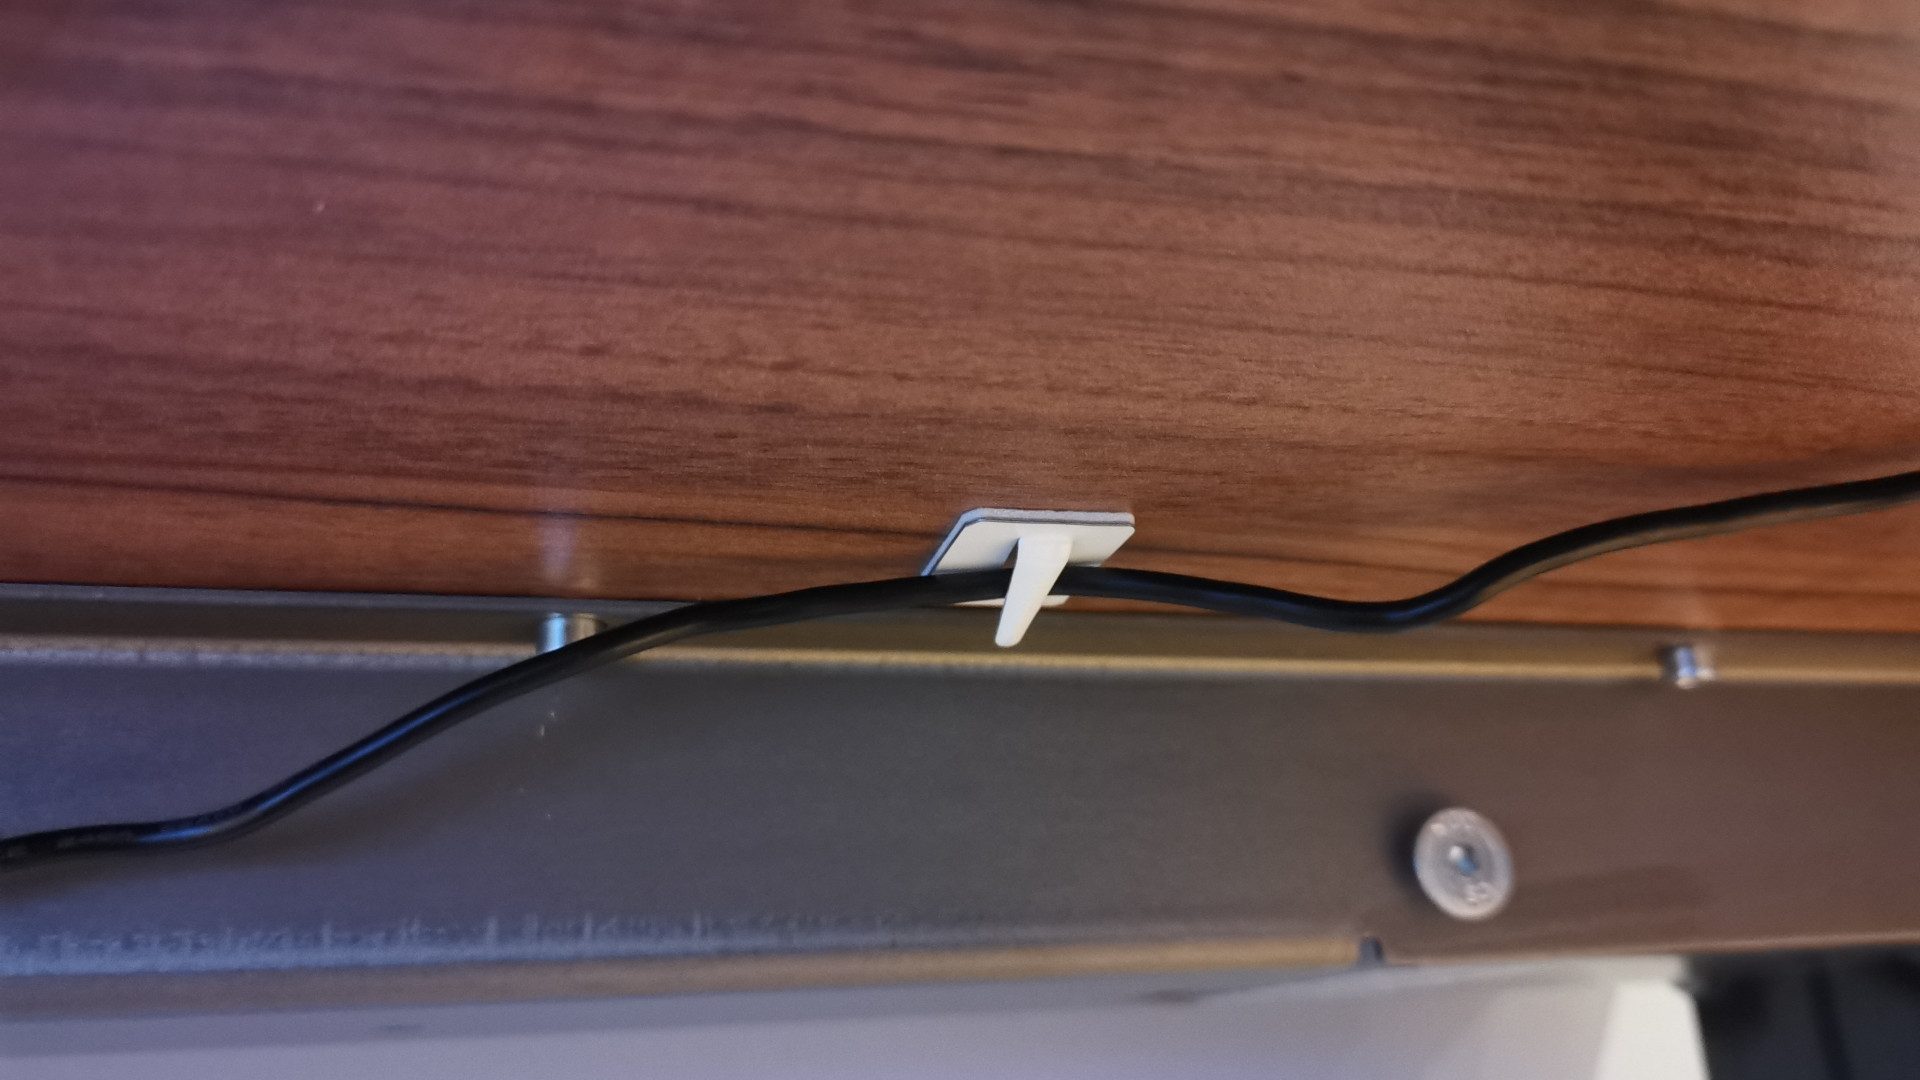 The cable tidy clips provided with the Friska Primo Designer standing desk